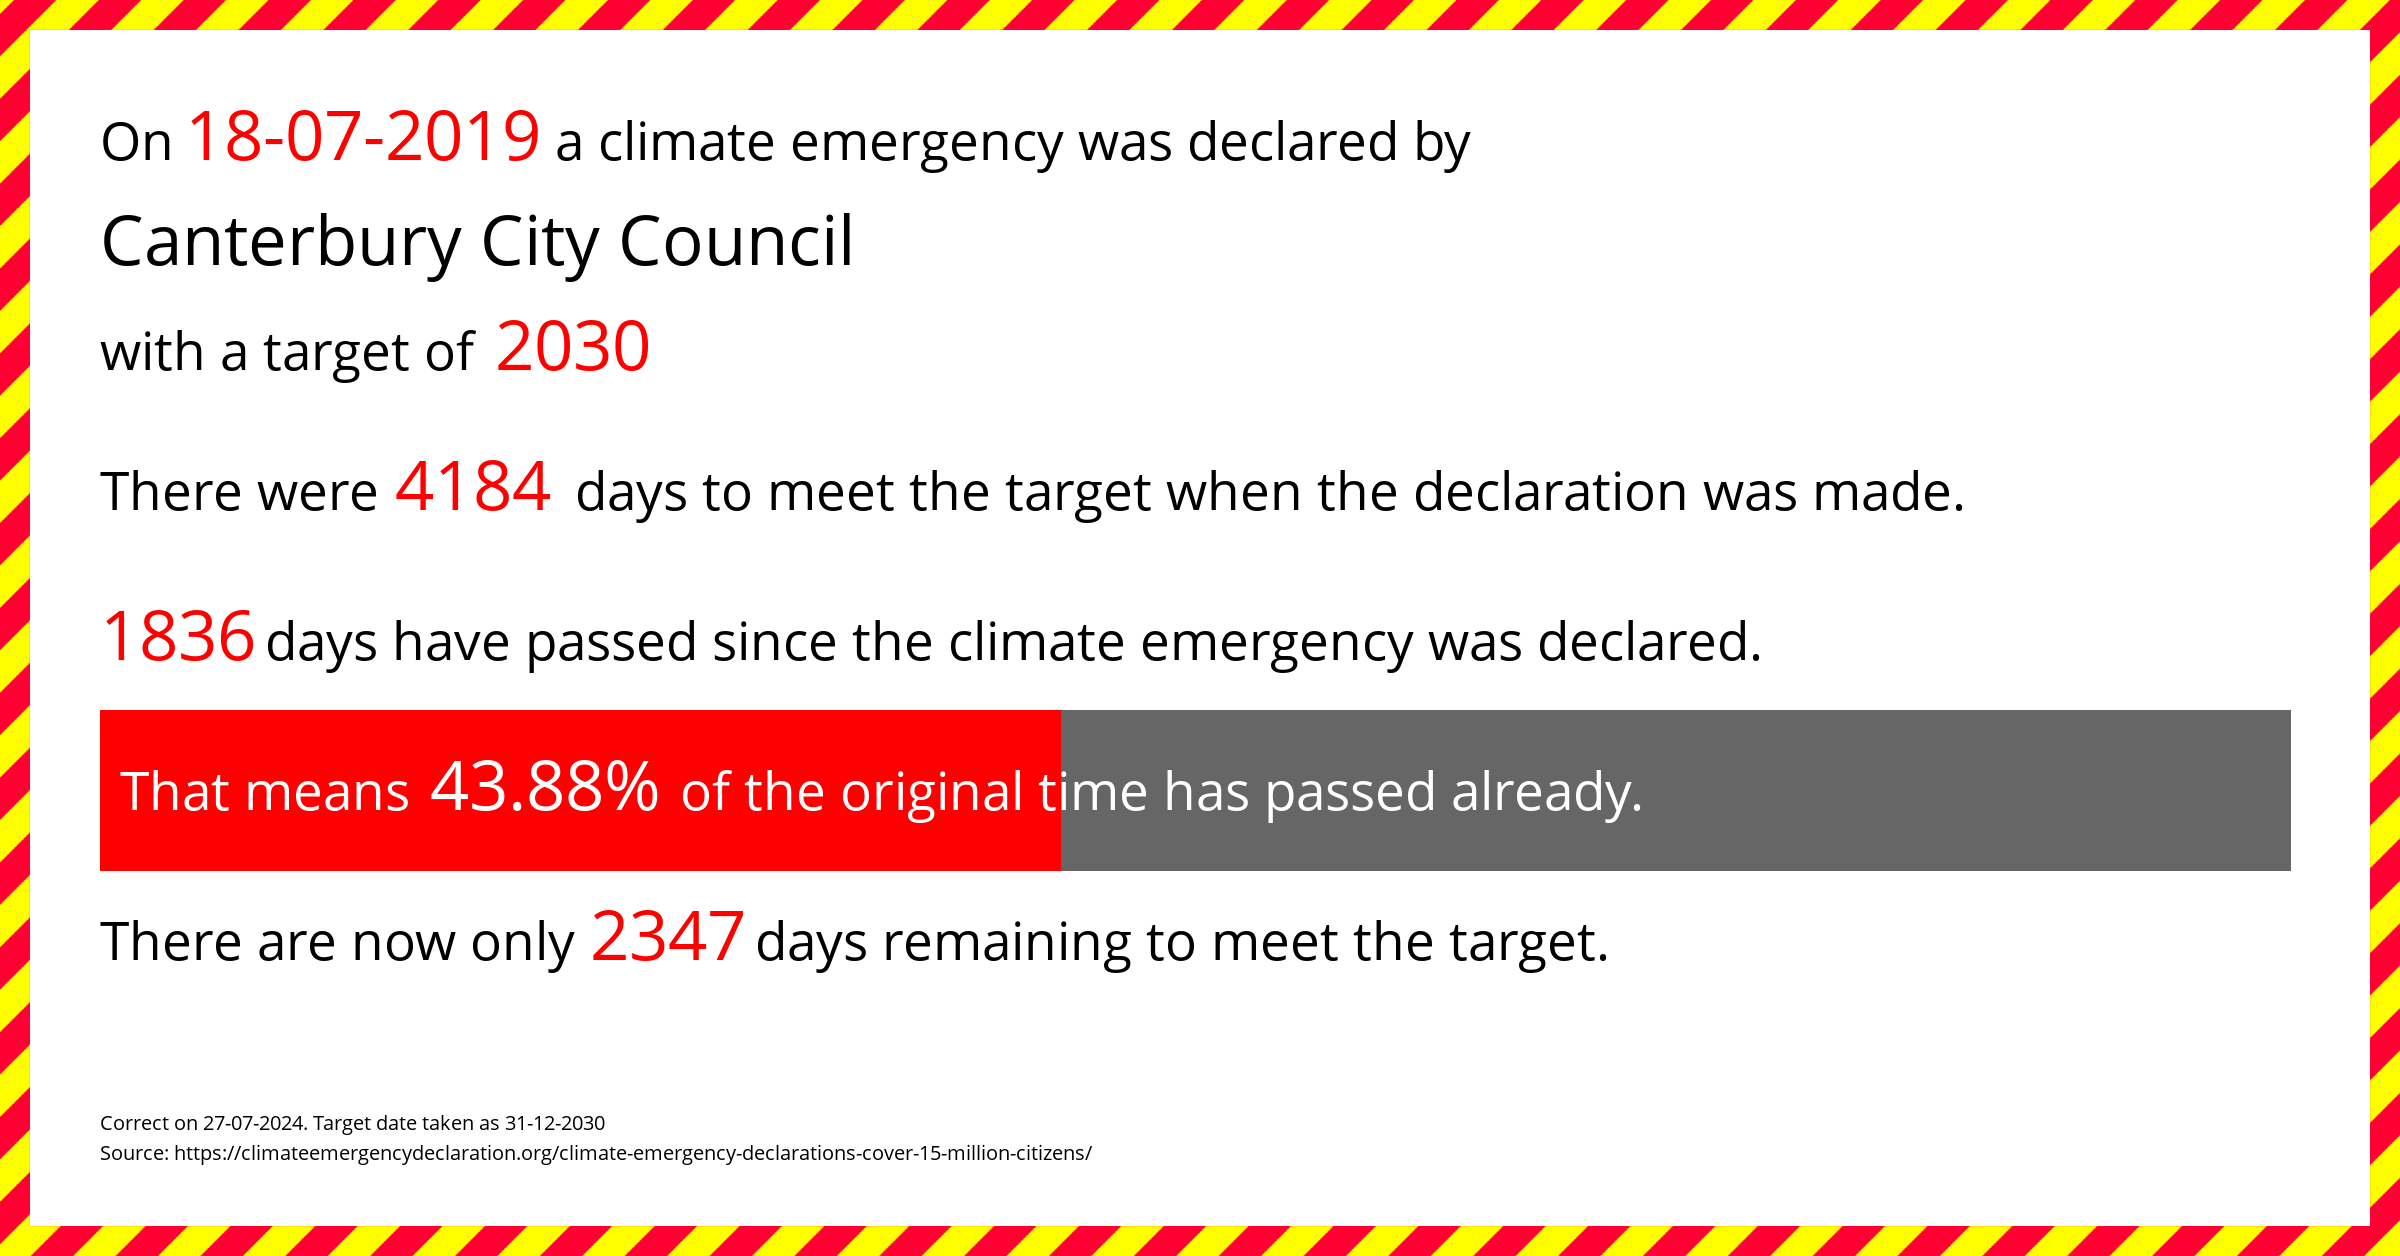 Canterbury City Council declared a Climate emergency on Thursday 18th July 2019, with a target of 2030.